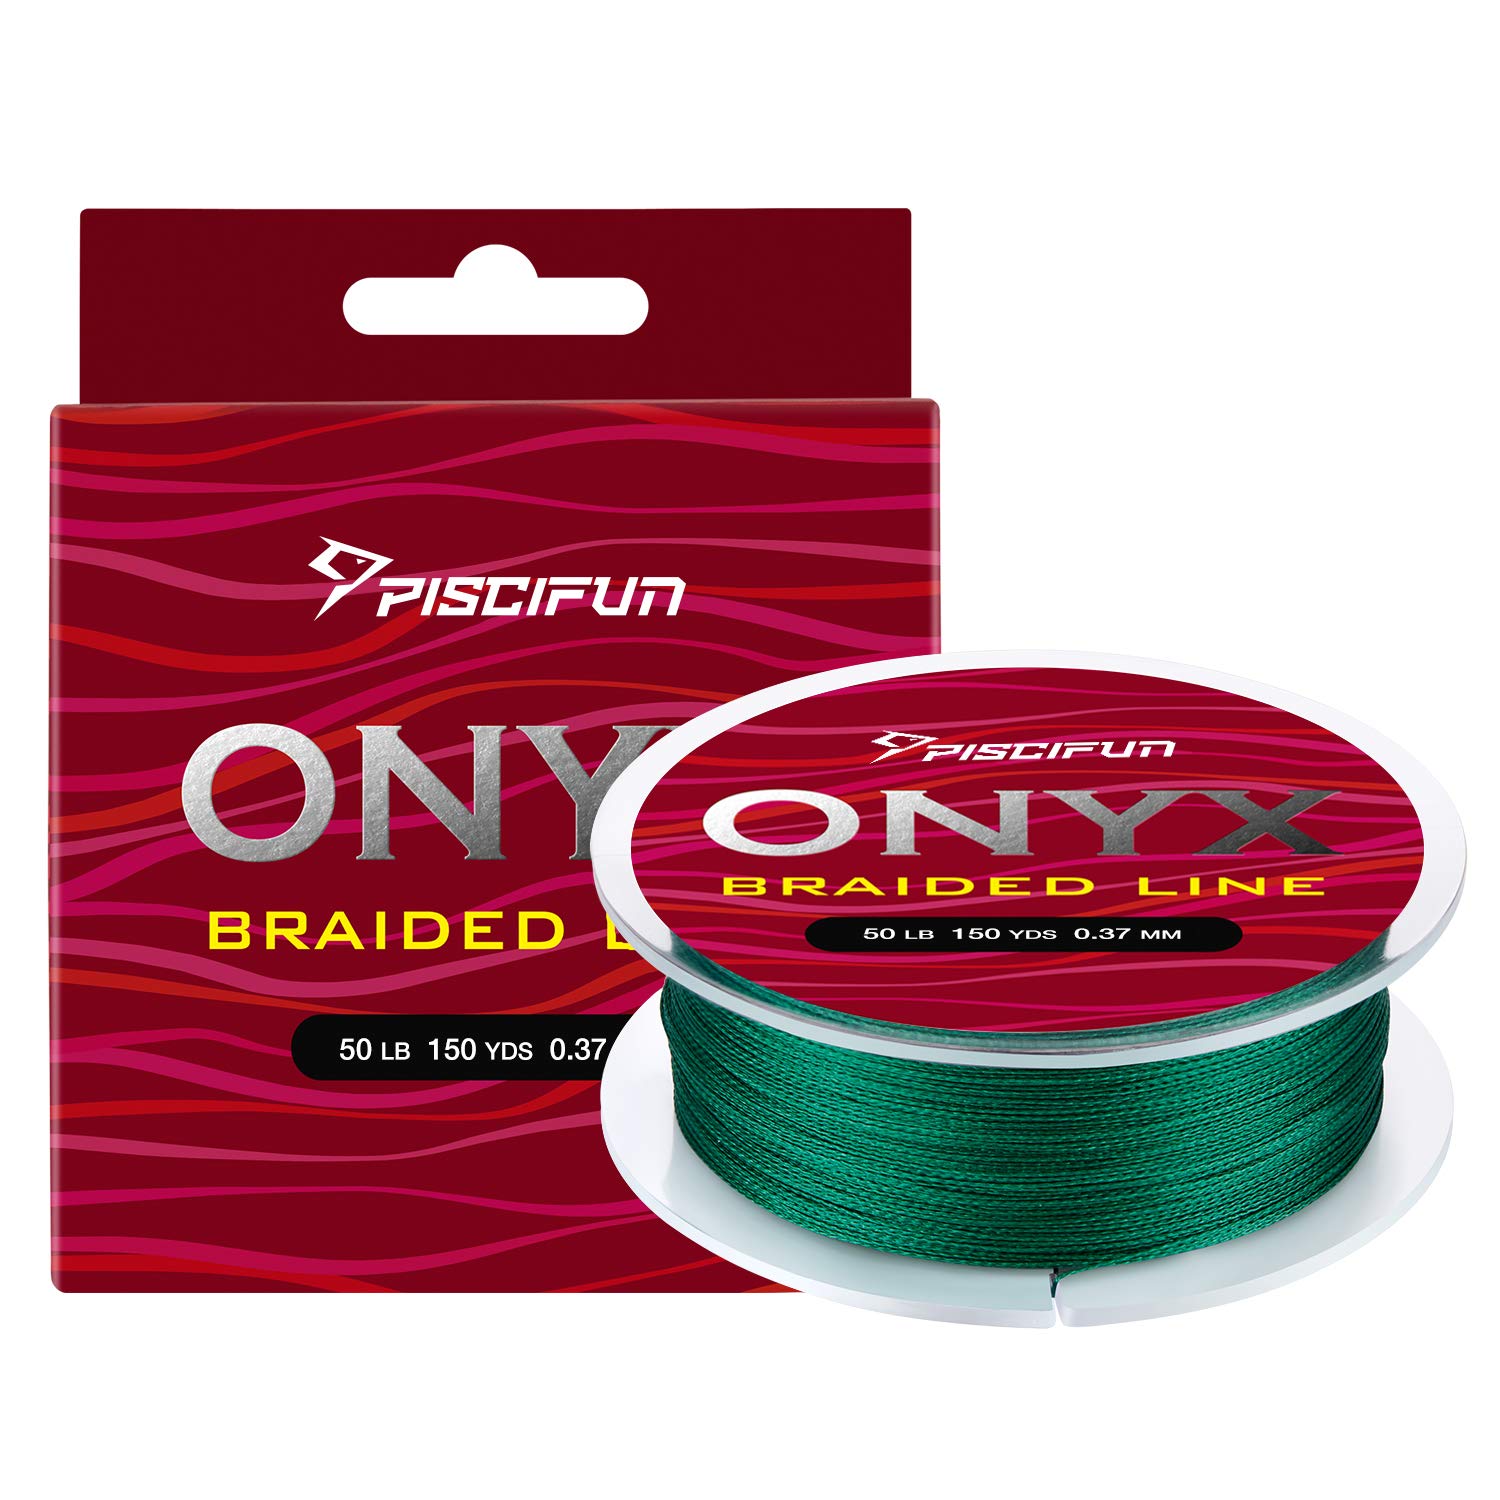 Piscifun Onyx Braided Fishing Line 6lb-150lb Superline Abrasion Resistant Braided  Lines Super Strong High Performance